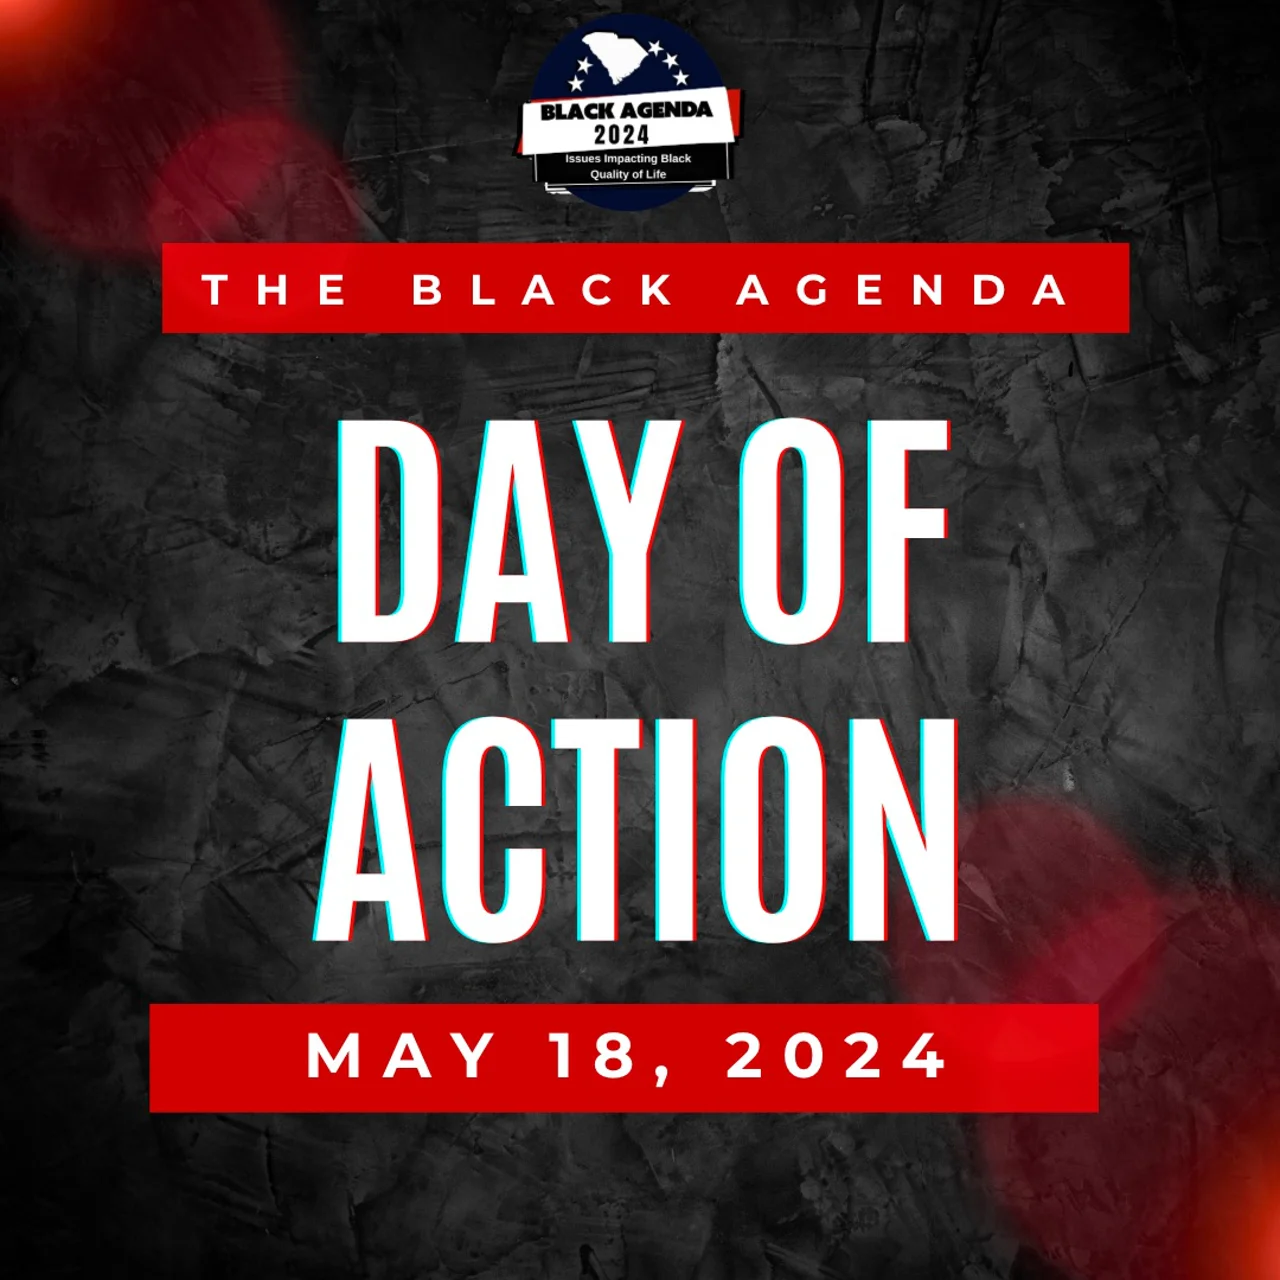 Join Us For the Day of Action